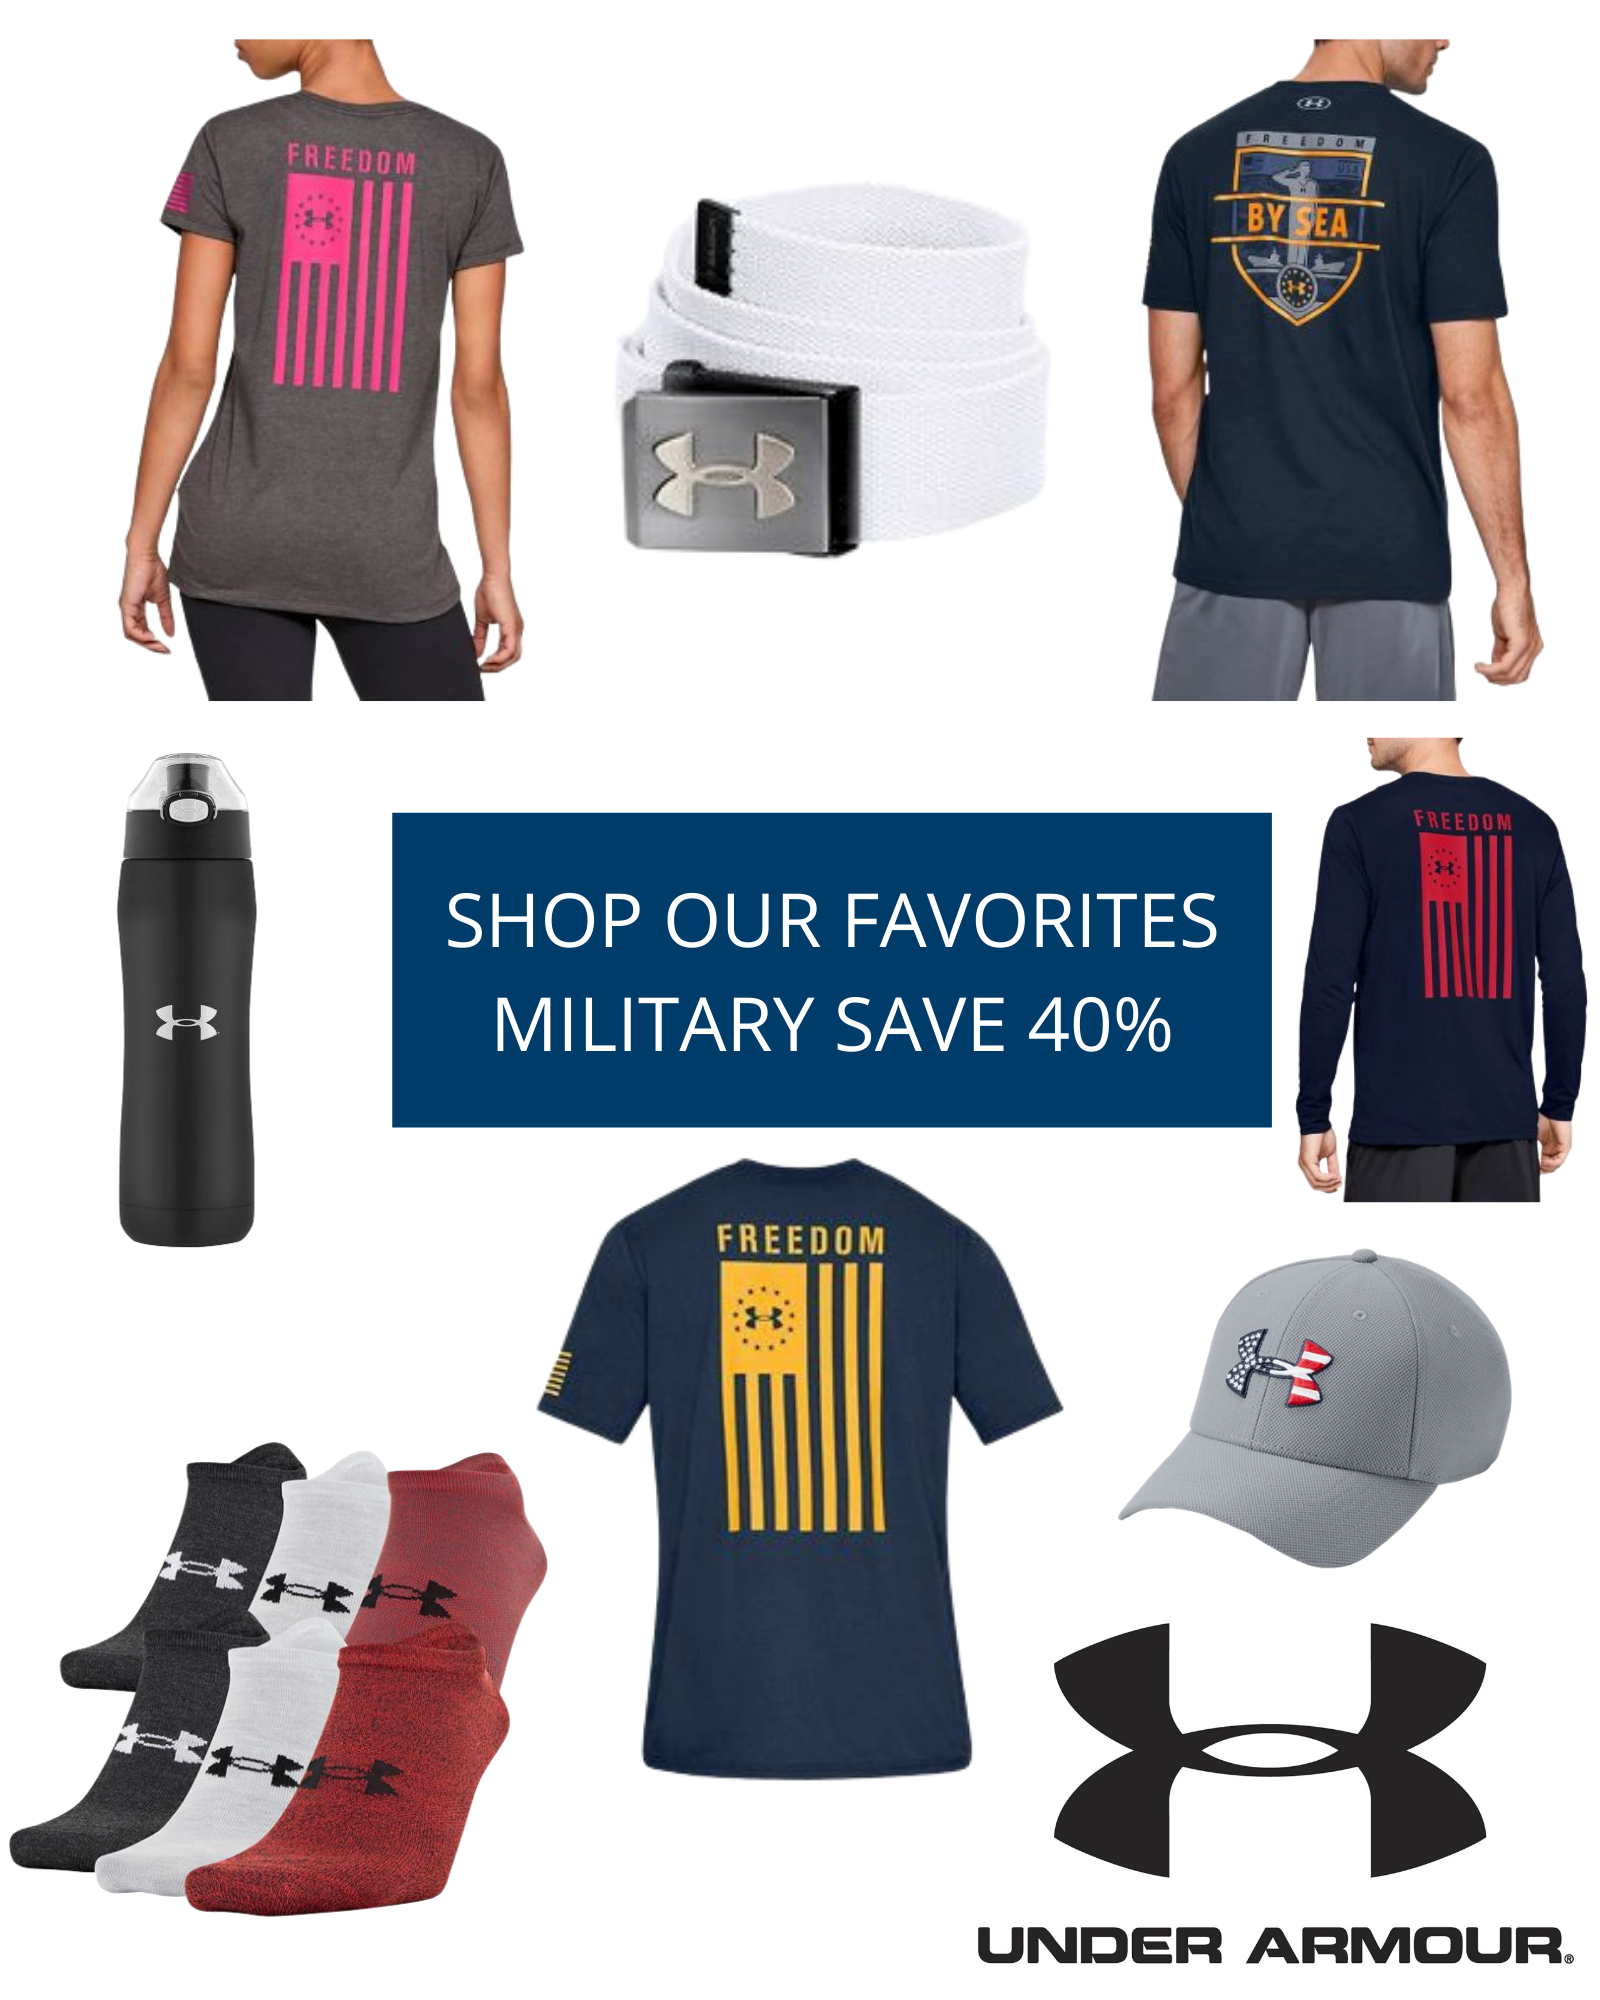 Under Armour Increases their Military 